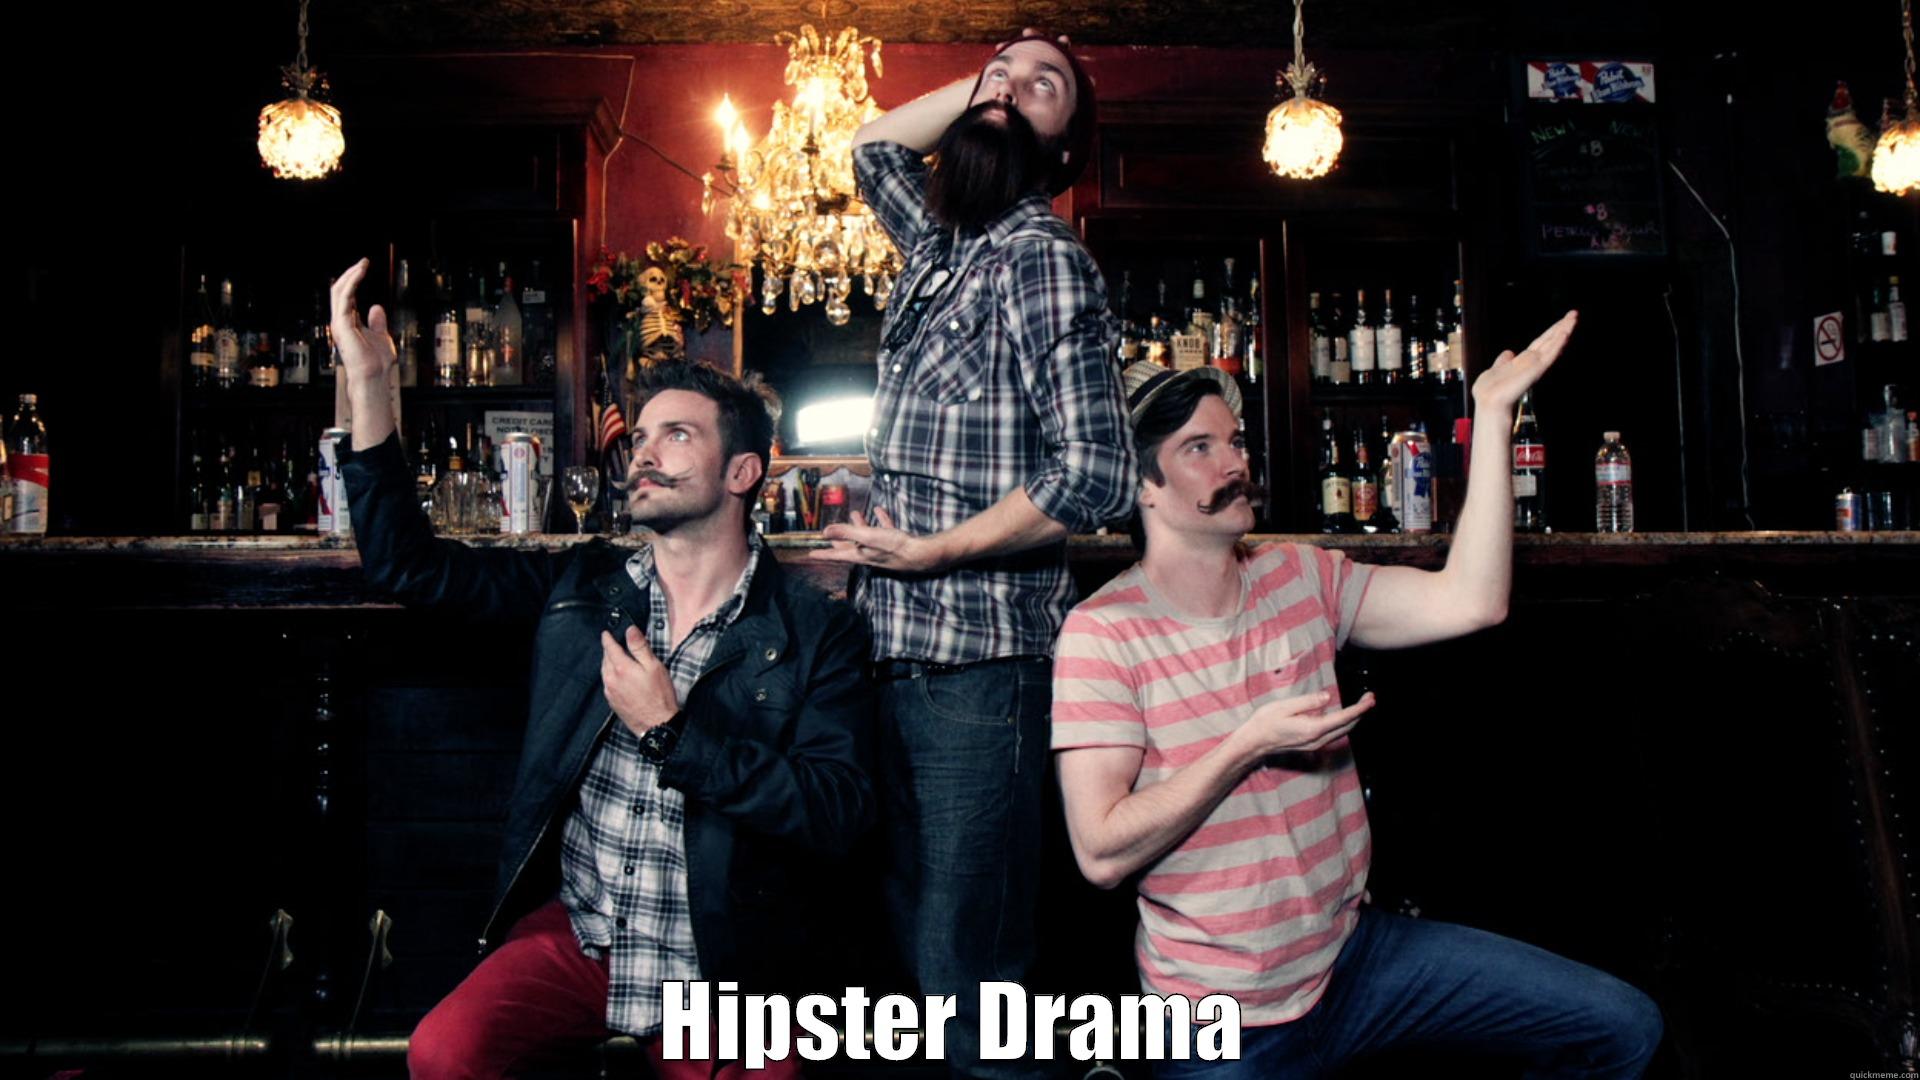  HIPSTER DRAMA Misc